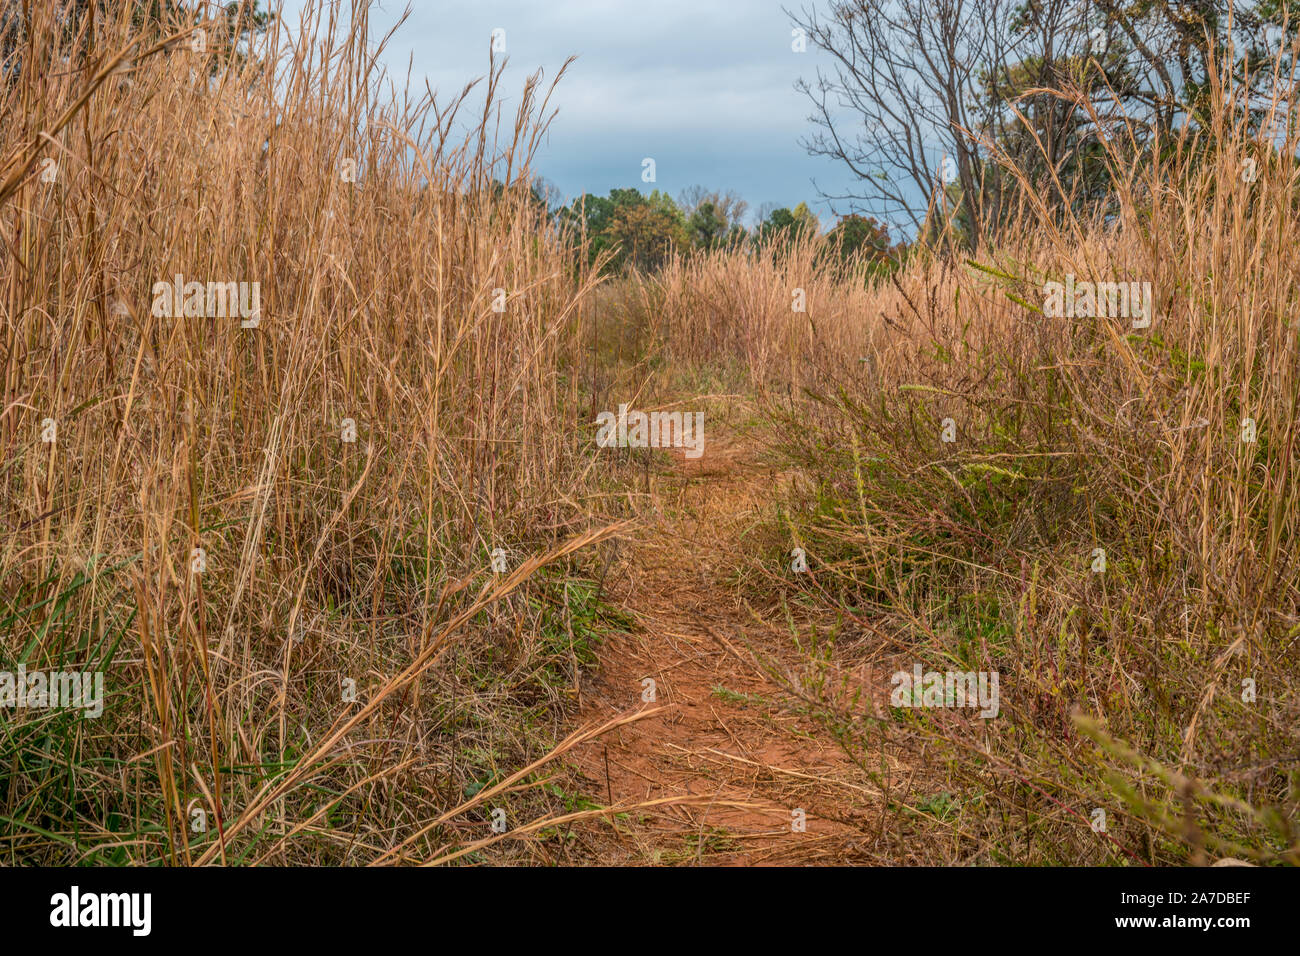 Thick lush field of dried tall grasses growing along the trails with the woodlands in the background on a sunny day in autumn Stock Photo